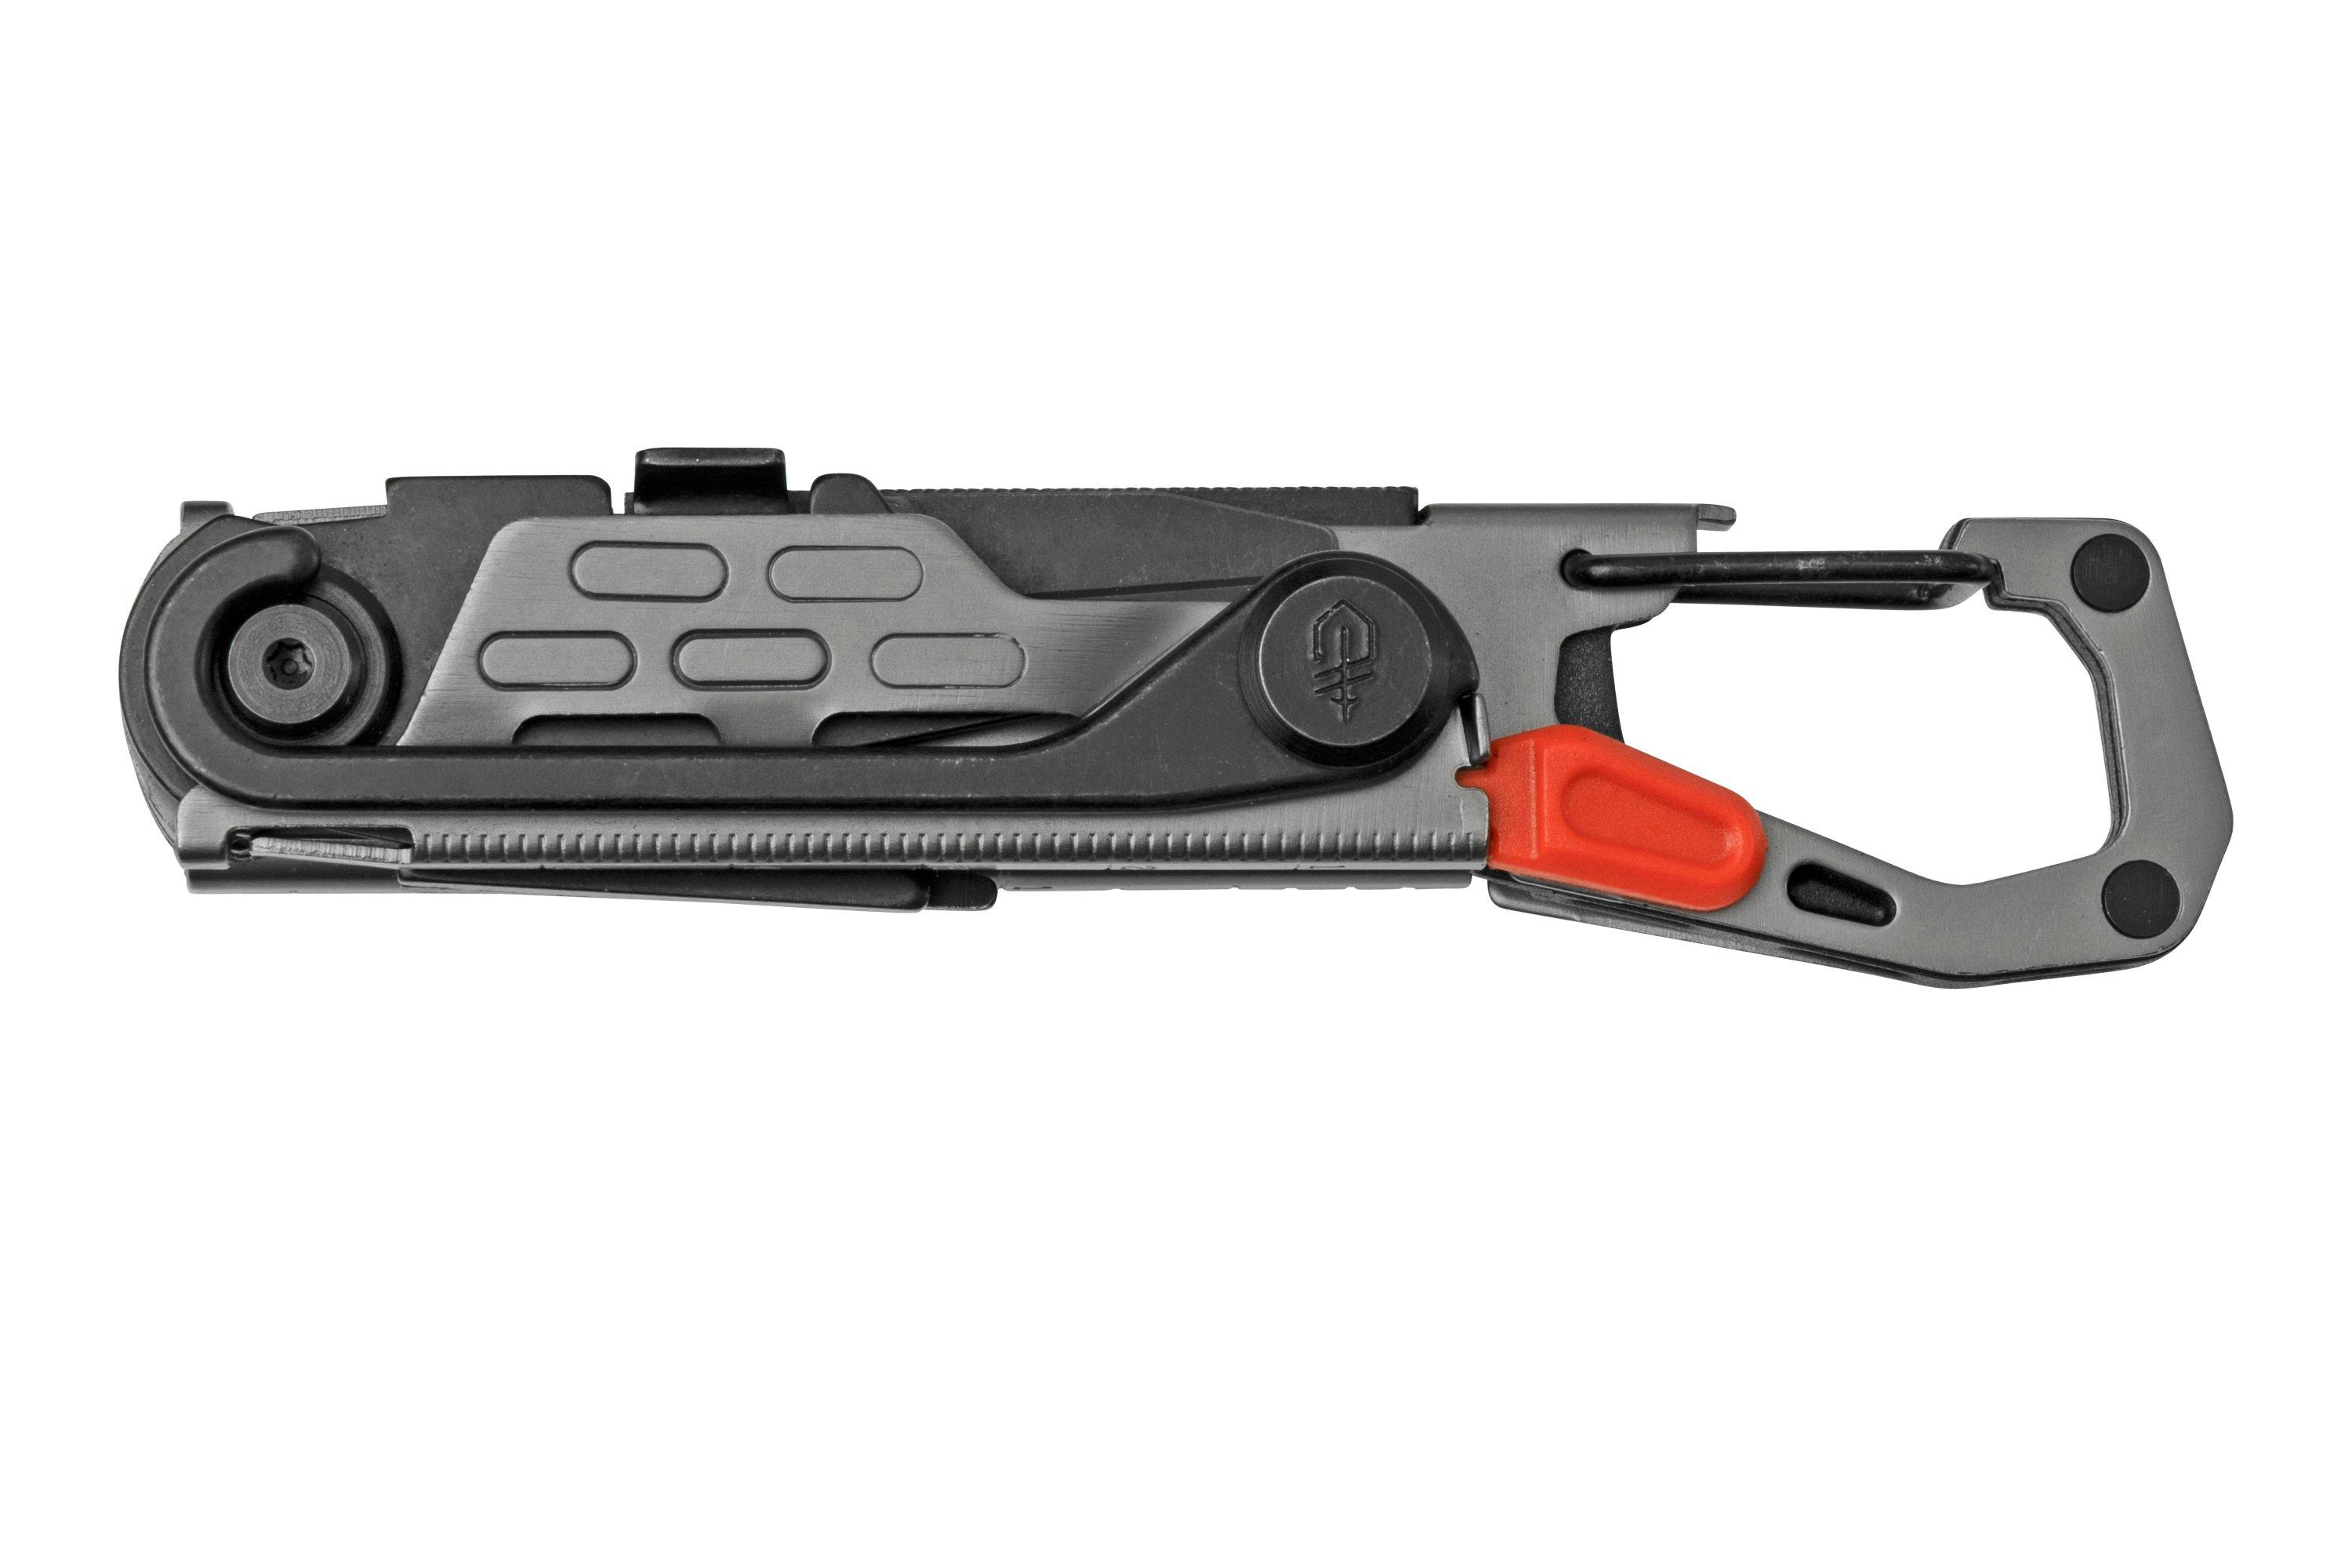 Gerber Stakeout 30-001743, graphite, multi-tool for camping ...